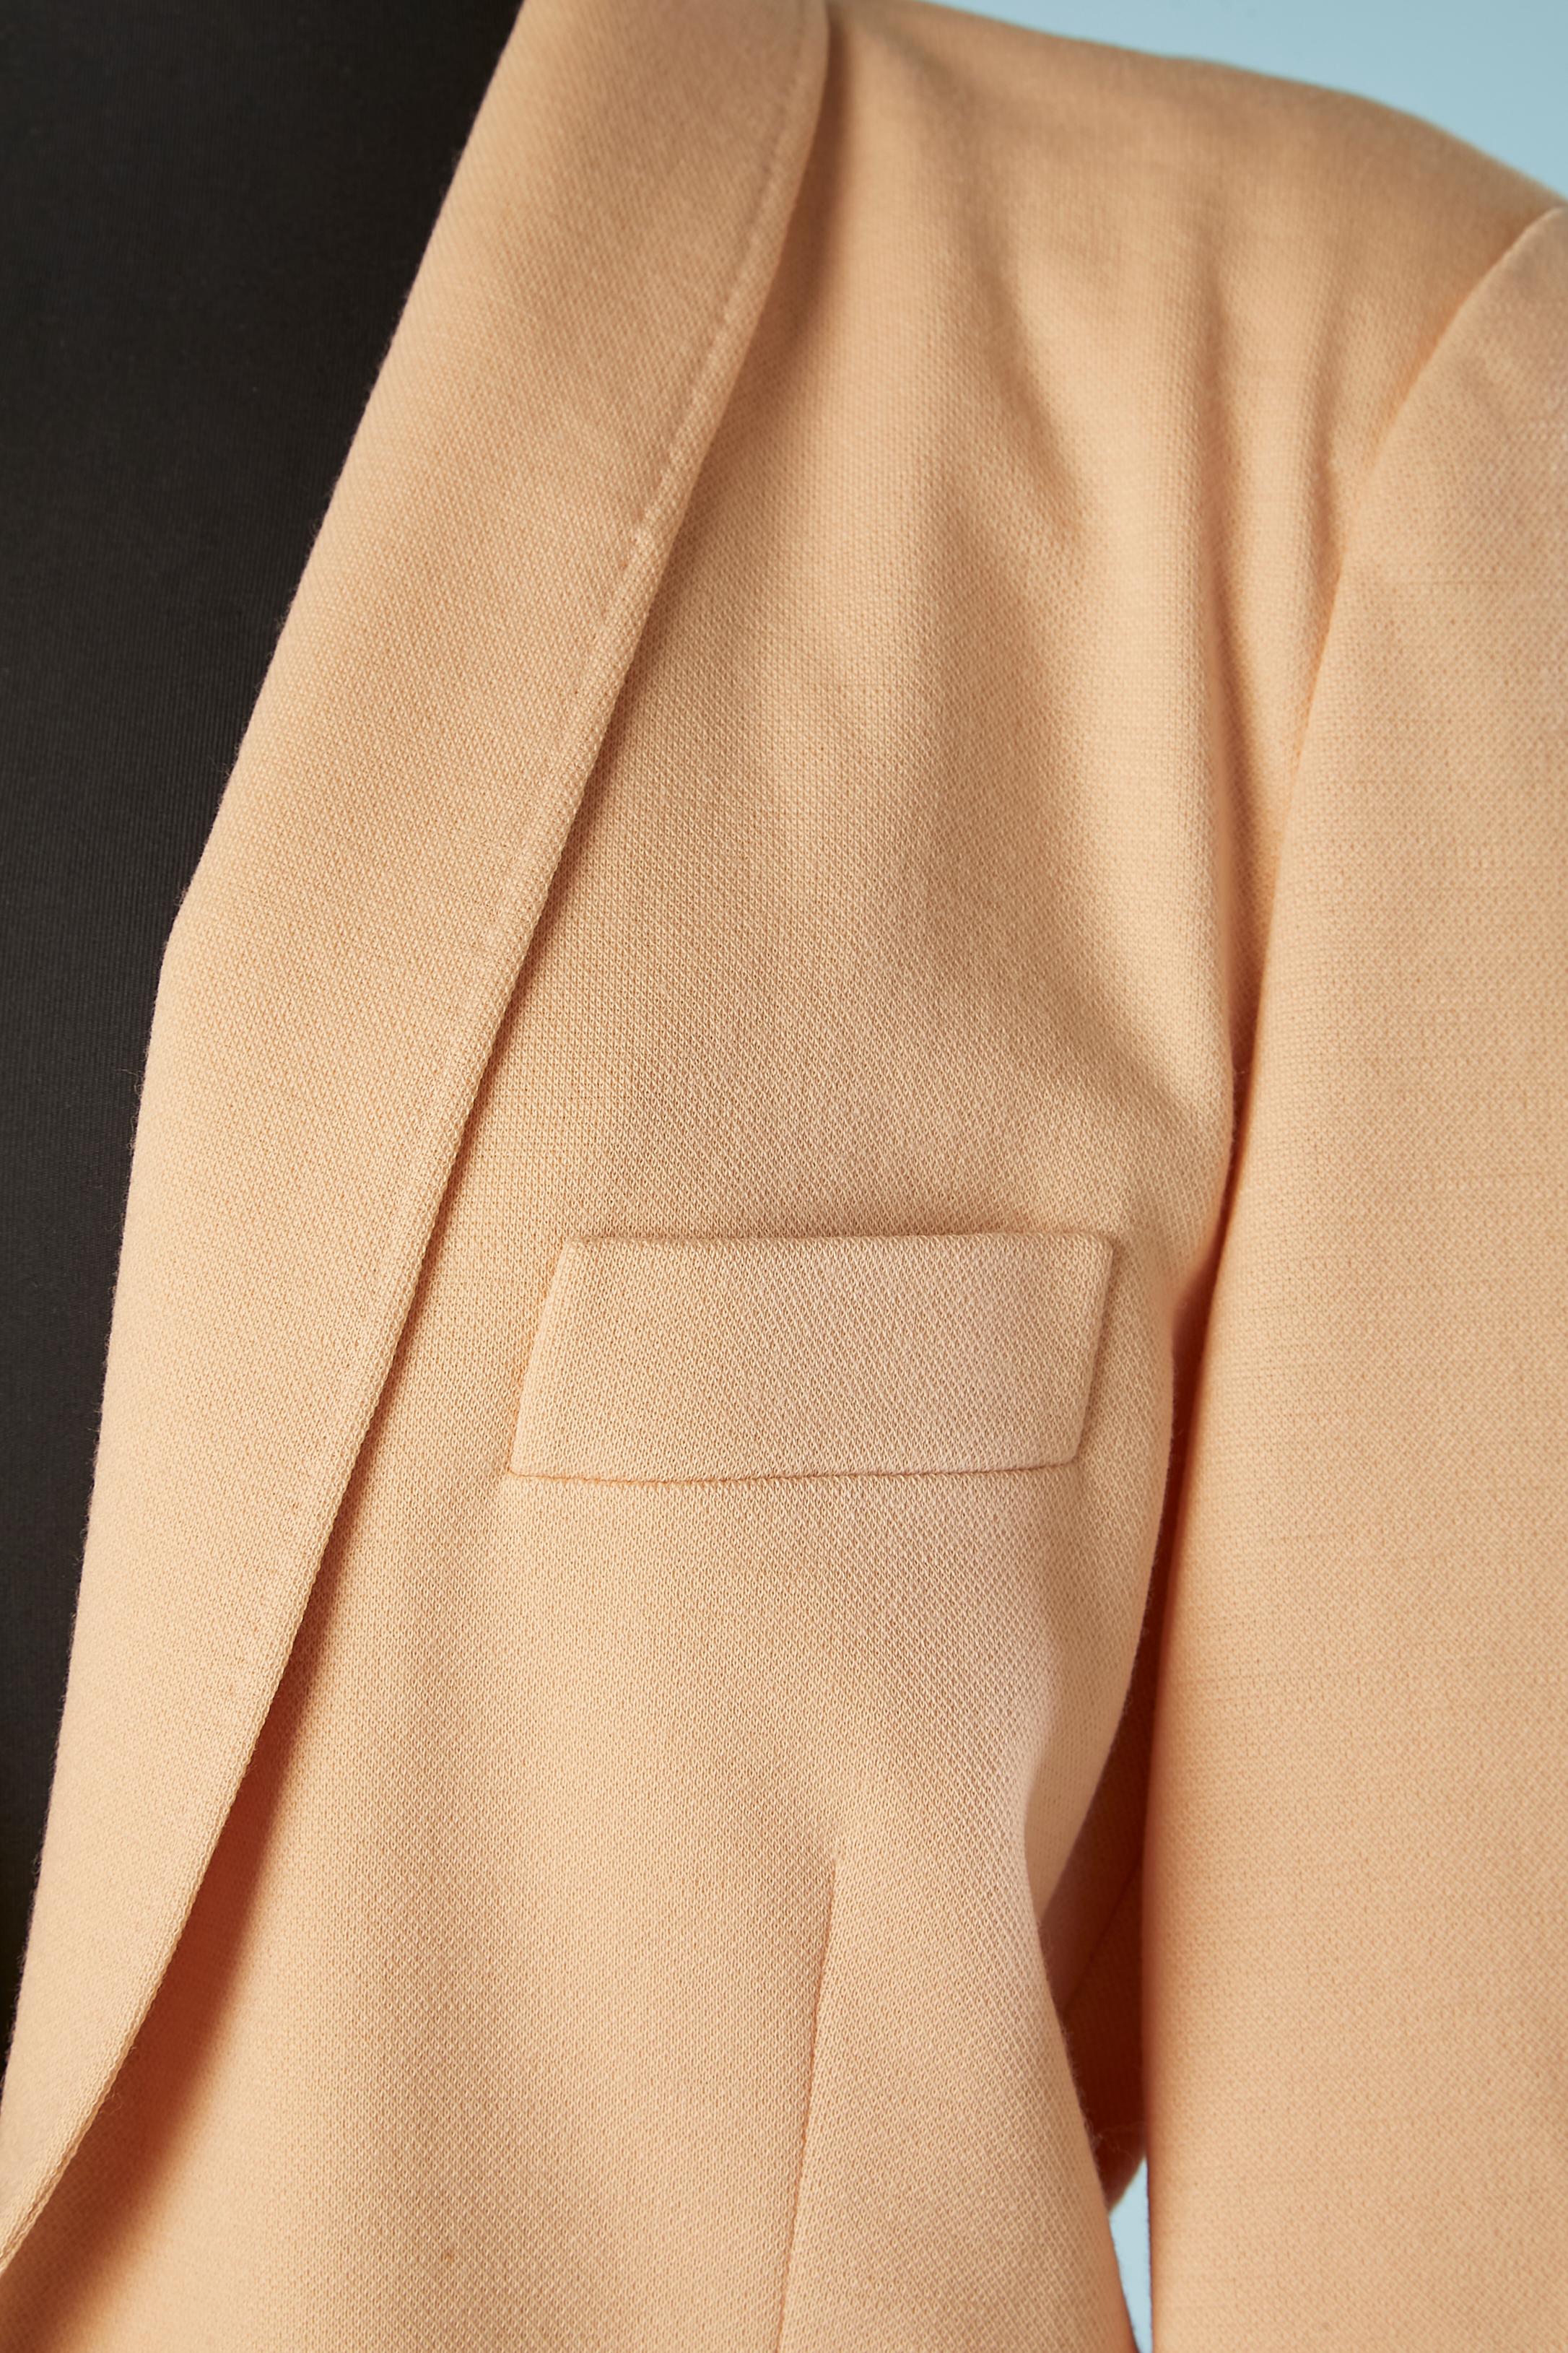 Pale pink wool jersey skirt-suit. no fabric composition information for the lining but probably rayon. 
Asymmetrical collar. One button end buttonhole closure in the middle front and buttons and buttonholes on the cuffs. 
Shoulder-pad. One inside